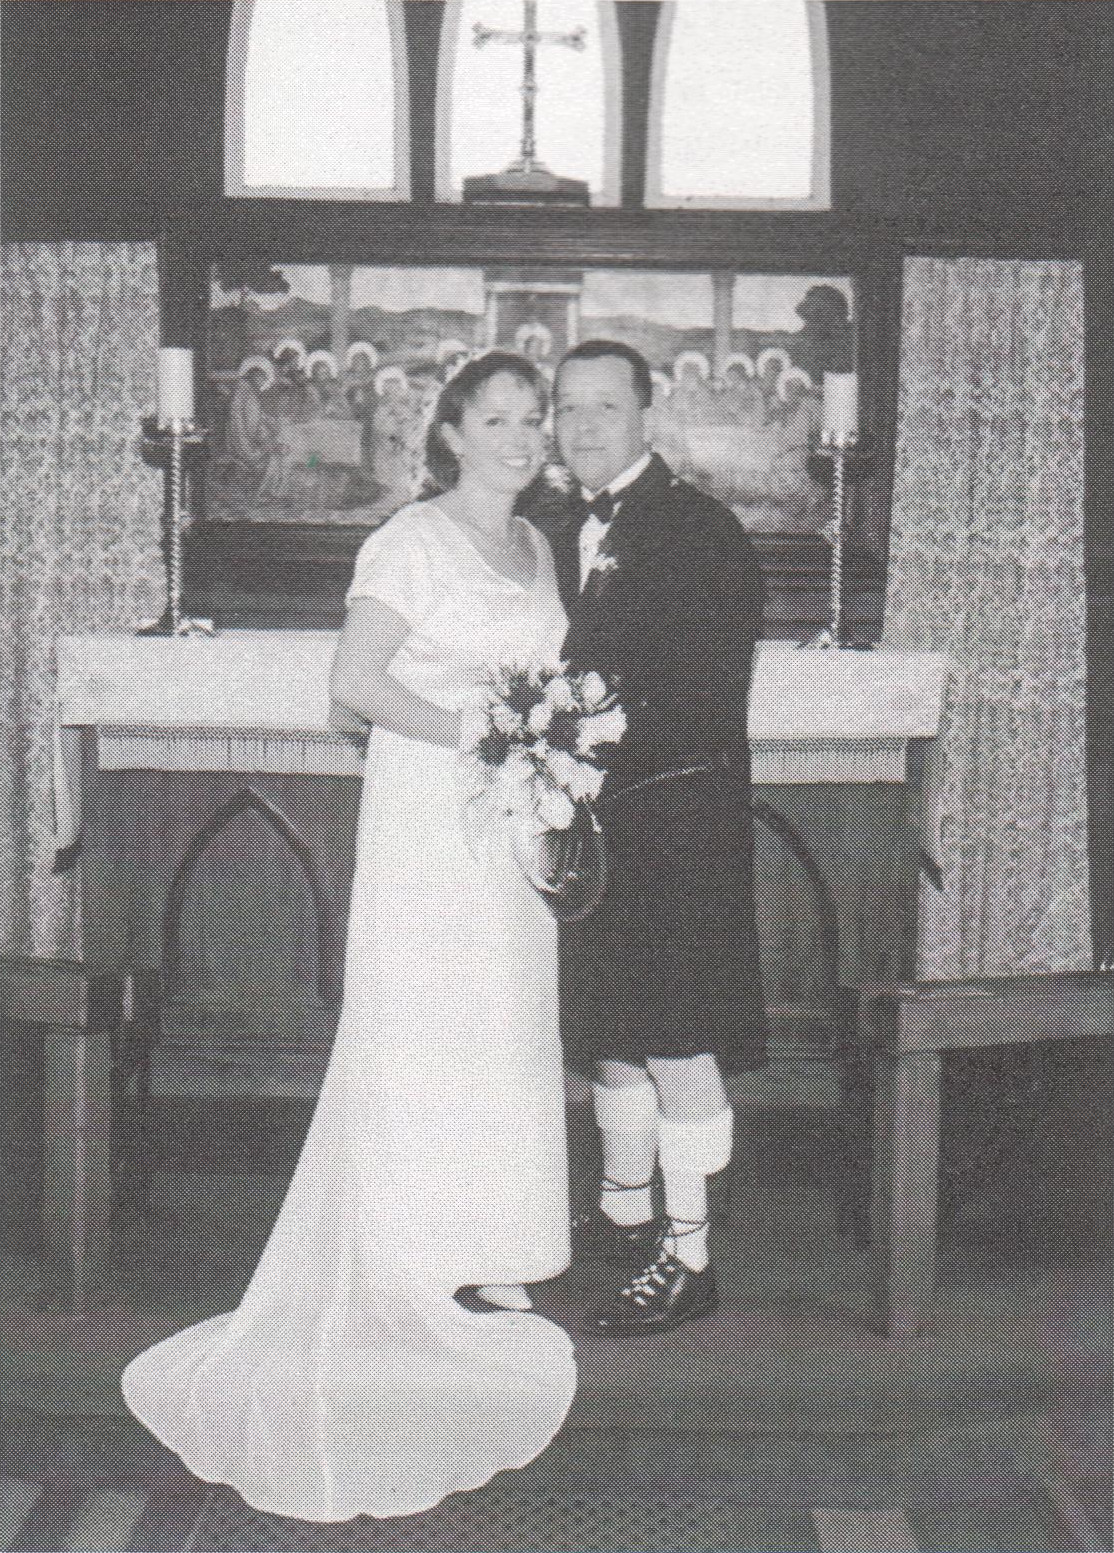 In the last wedding at the old All Saints Church, Gemma Beierback married Doug Davidson, 2002